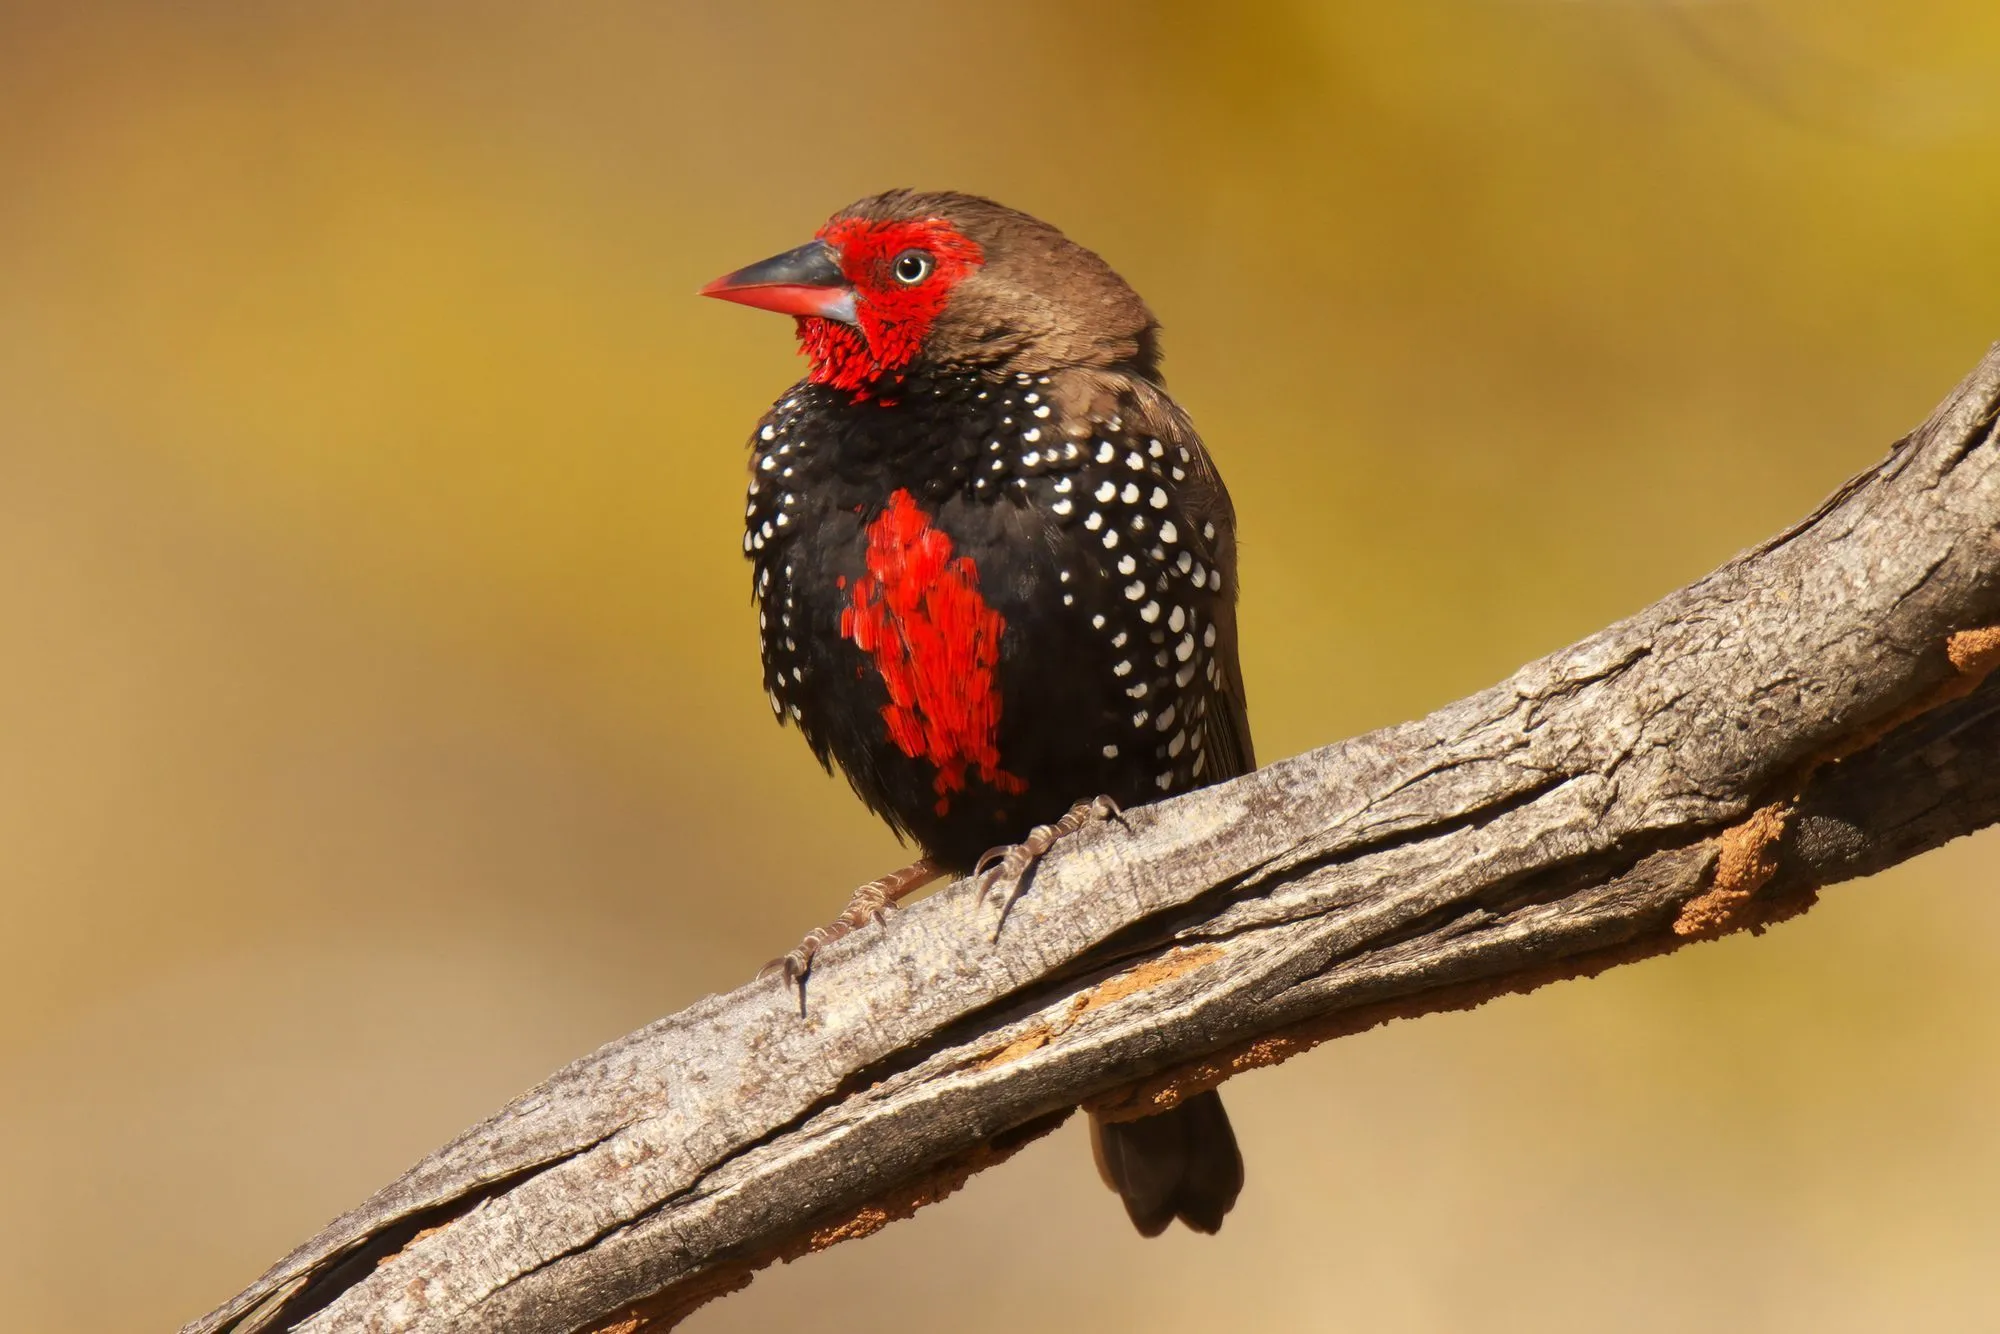 The painted finch facts that you might enjoy.)